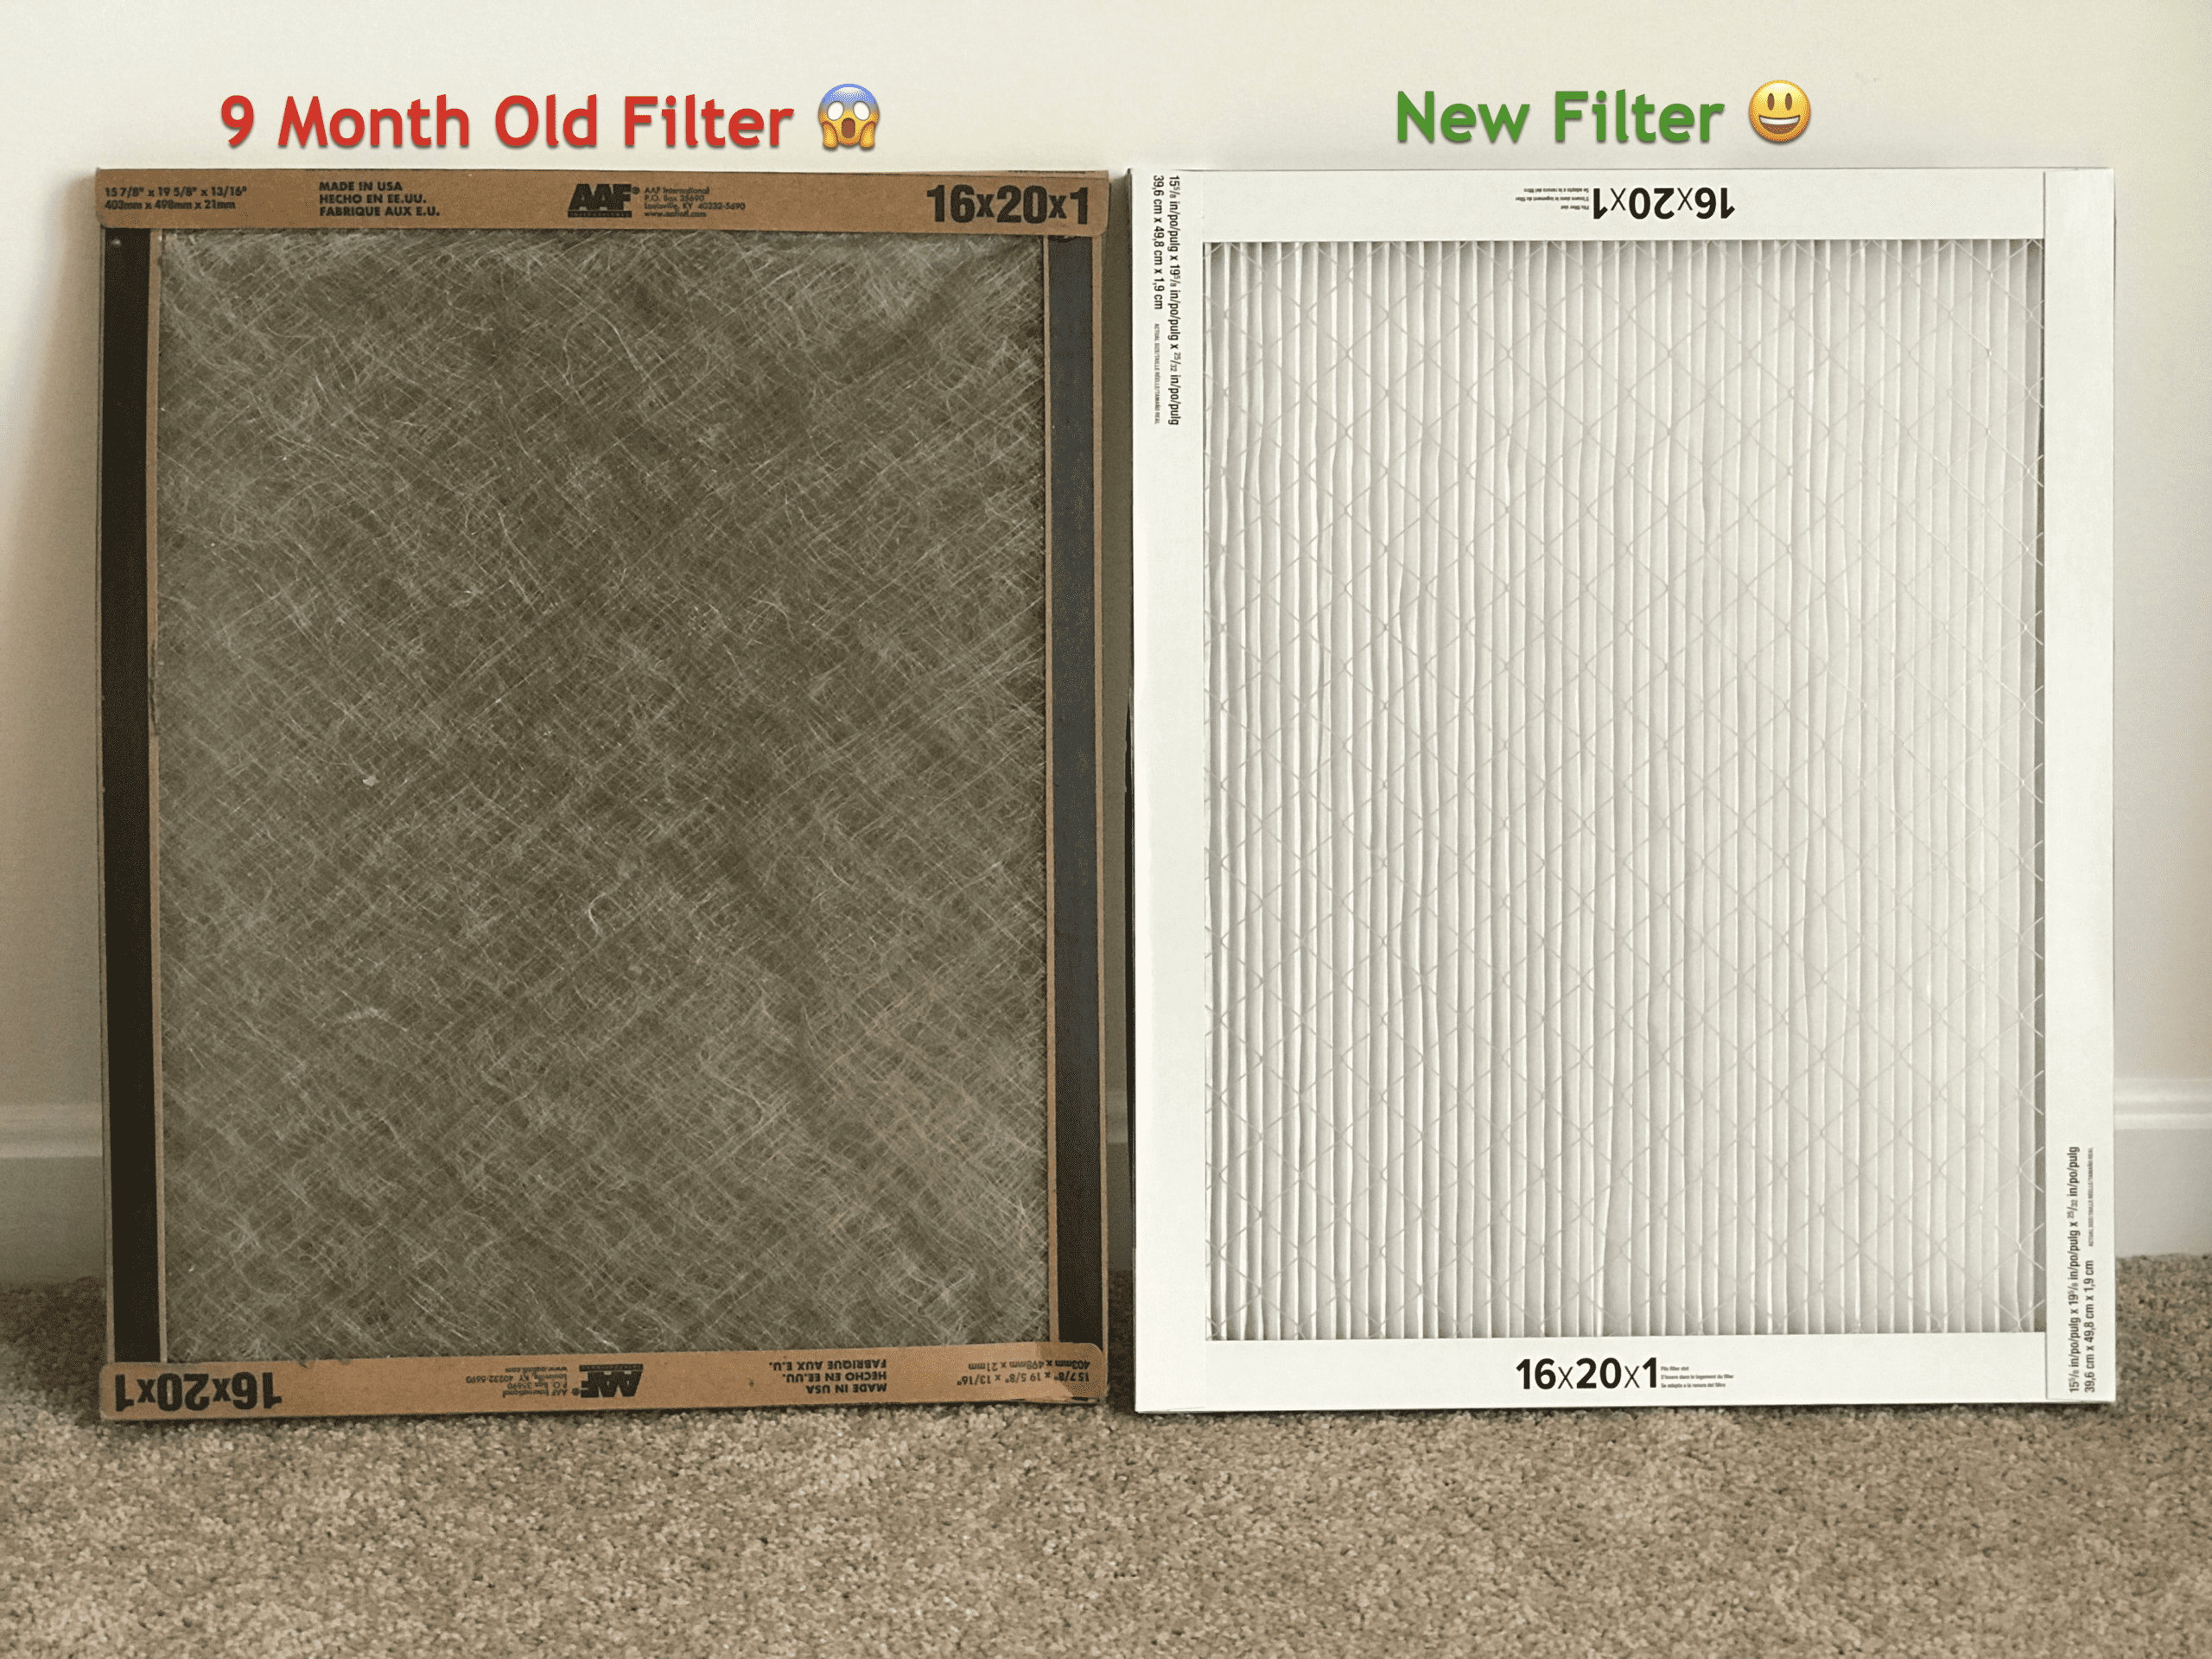 What Happens if You Forget to Replace Your Furnace Air Filter? - 9-month old filter